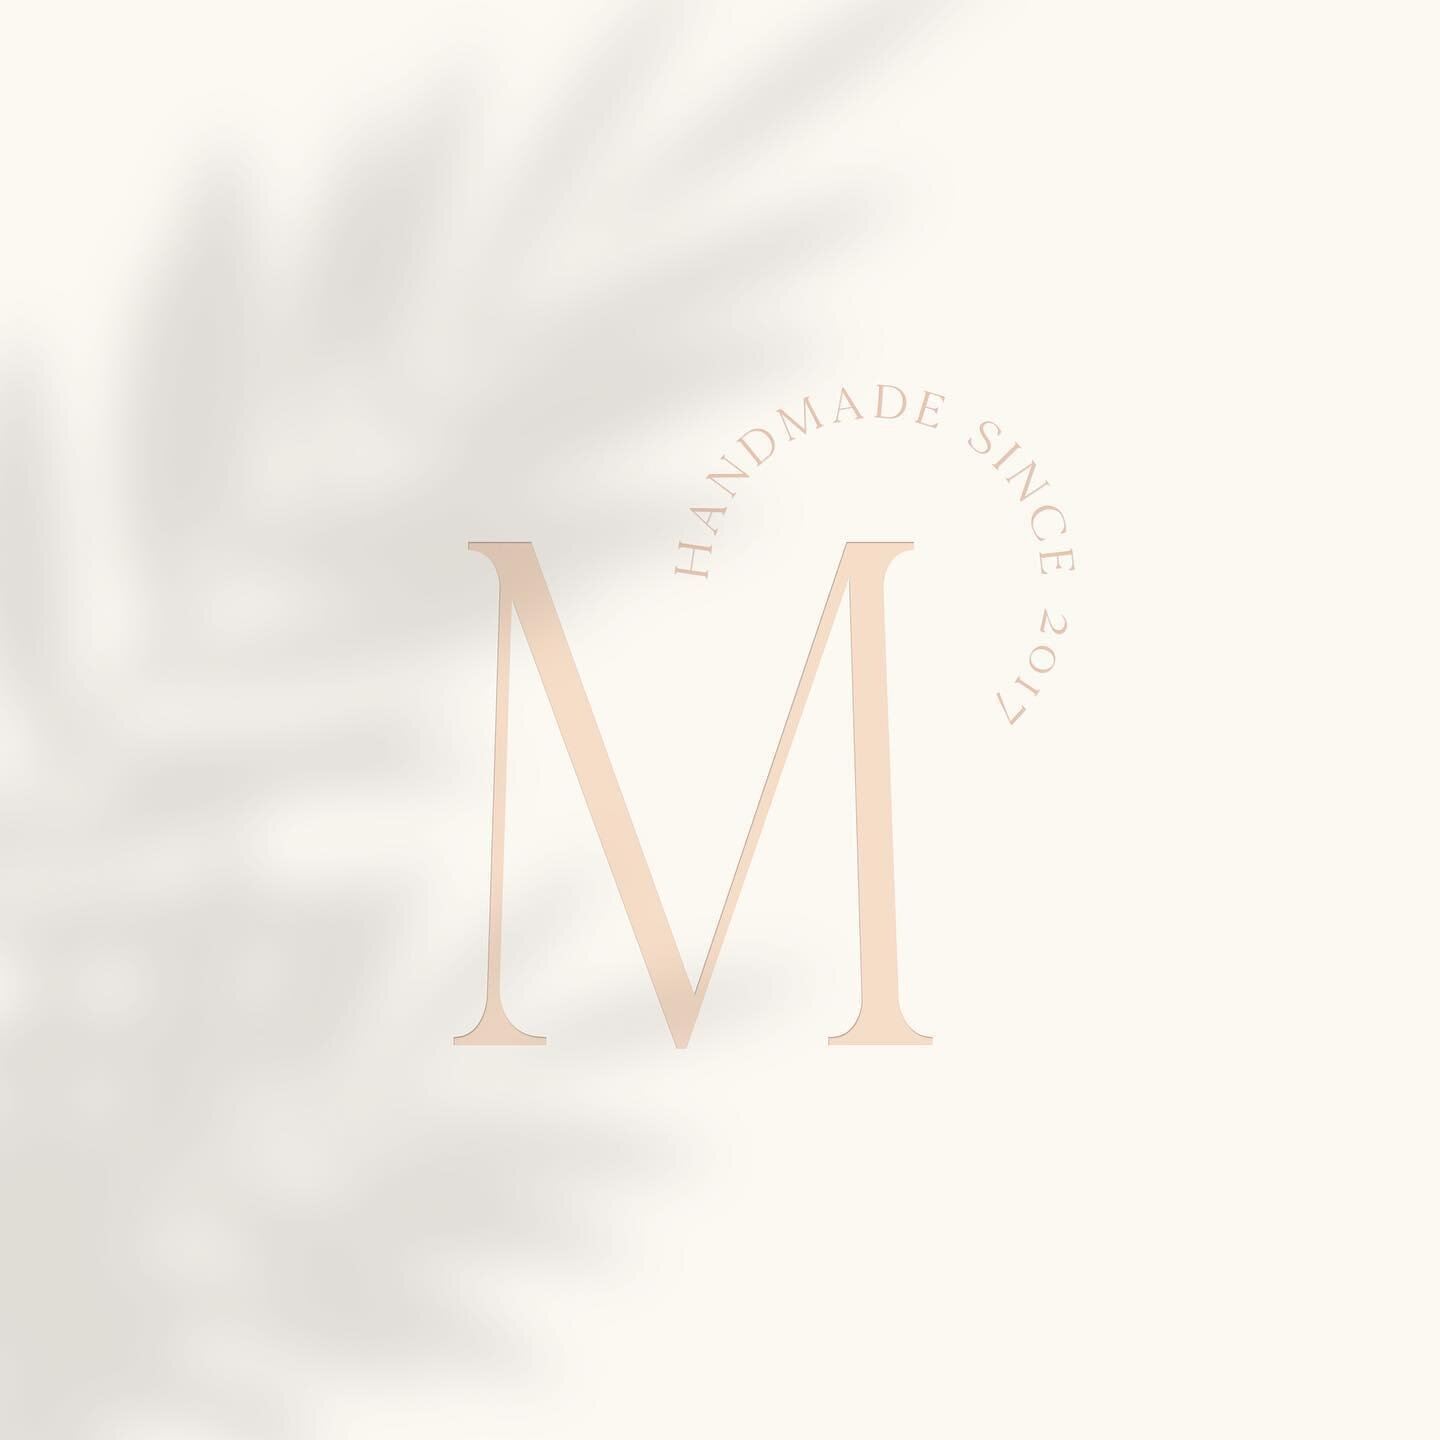 We&rsquo;ve been working with @bexleydesignco on a fun brand refresh for Marbella and I&rsquo;m so excited to show you guys what we came up with!
.
Thinking in depth about your brand, your business and your vision going forward is so much harder than